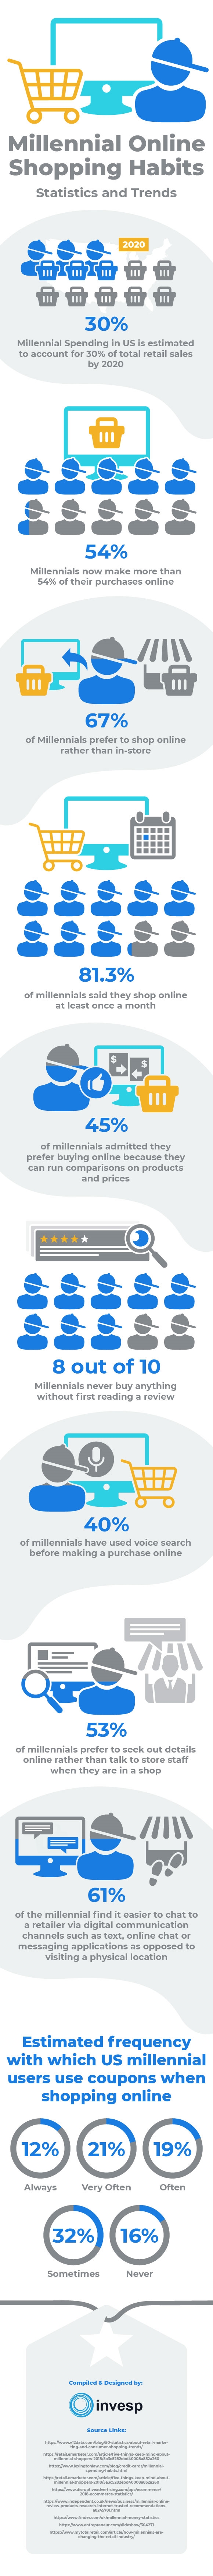 How Millennial Online Shopping is Changing the Retail Industry [Infographic]